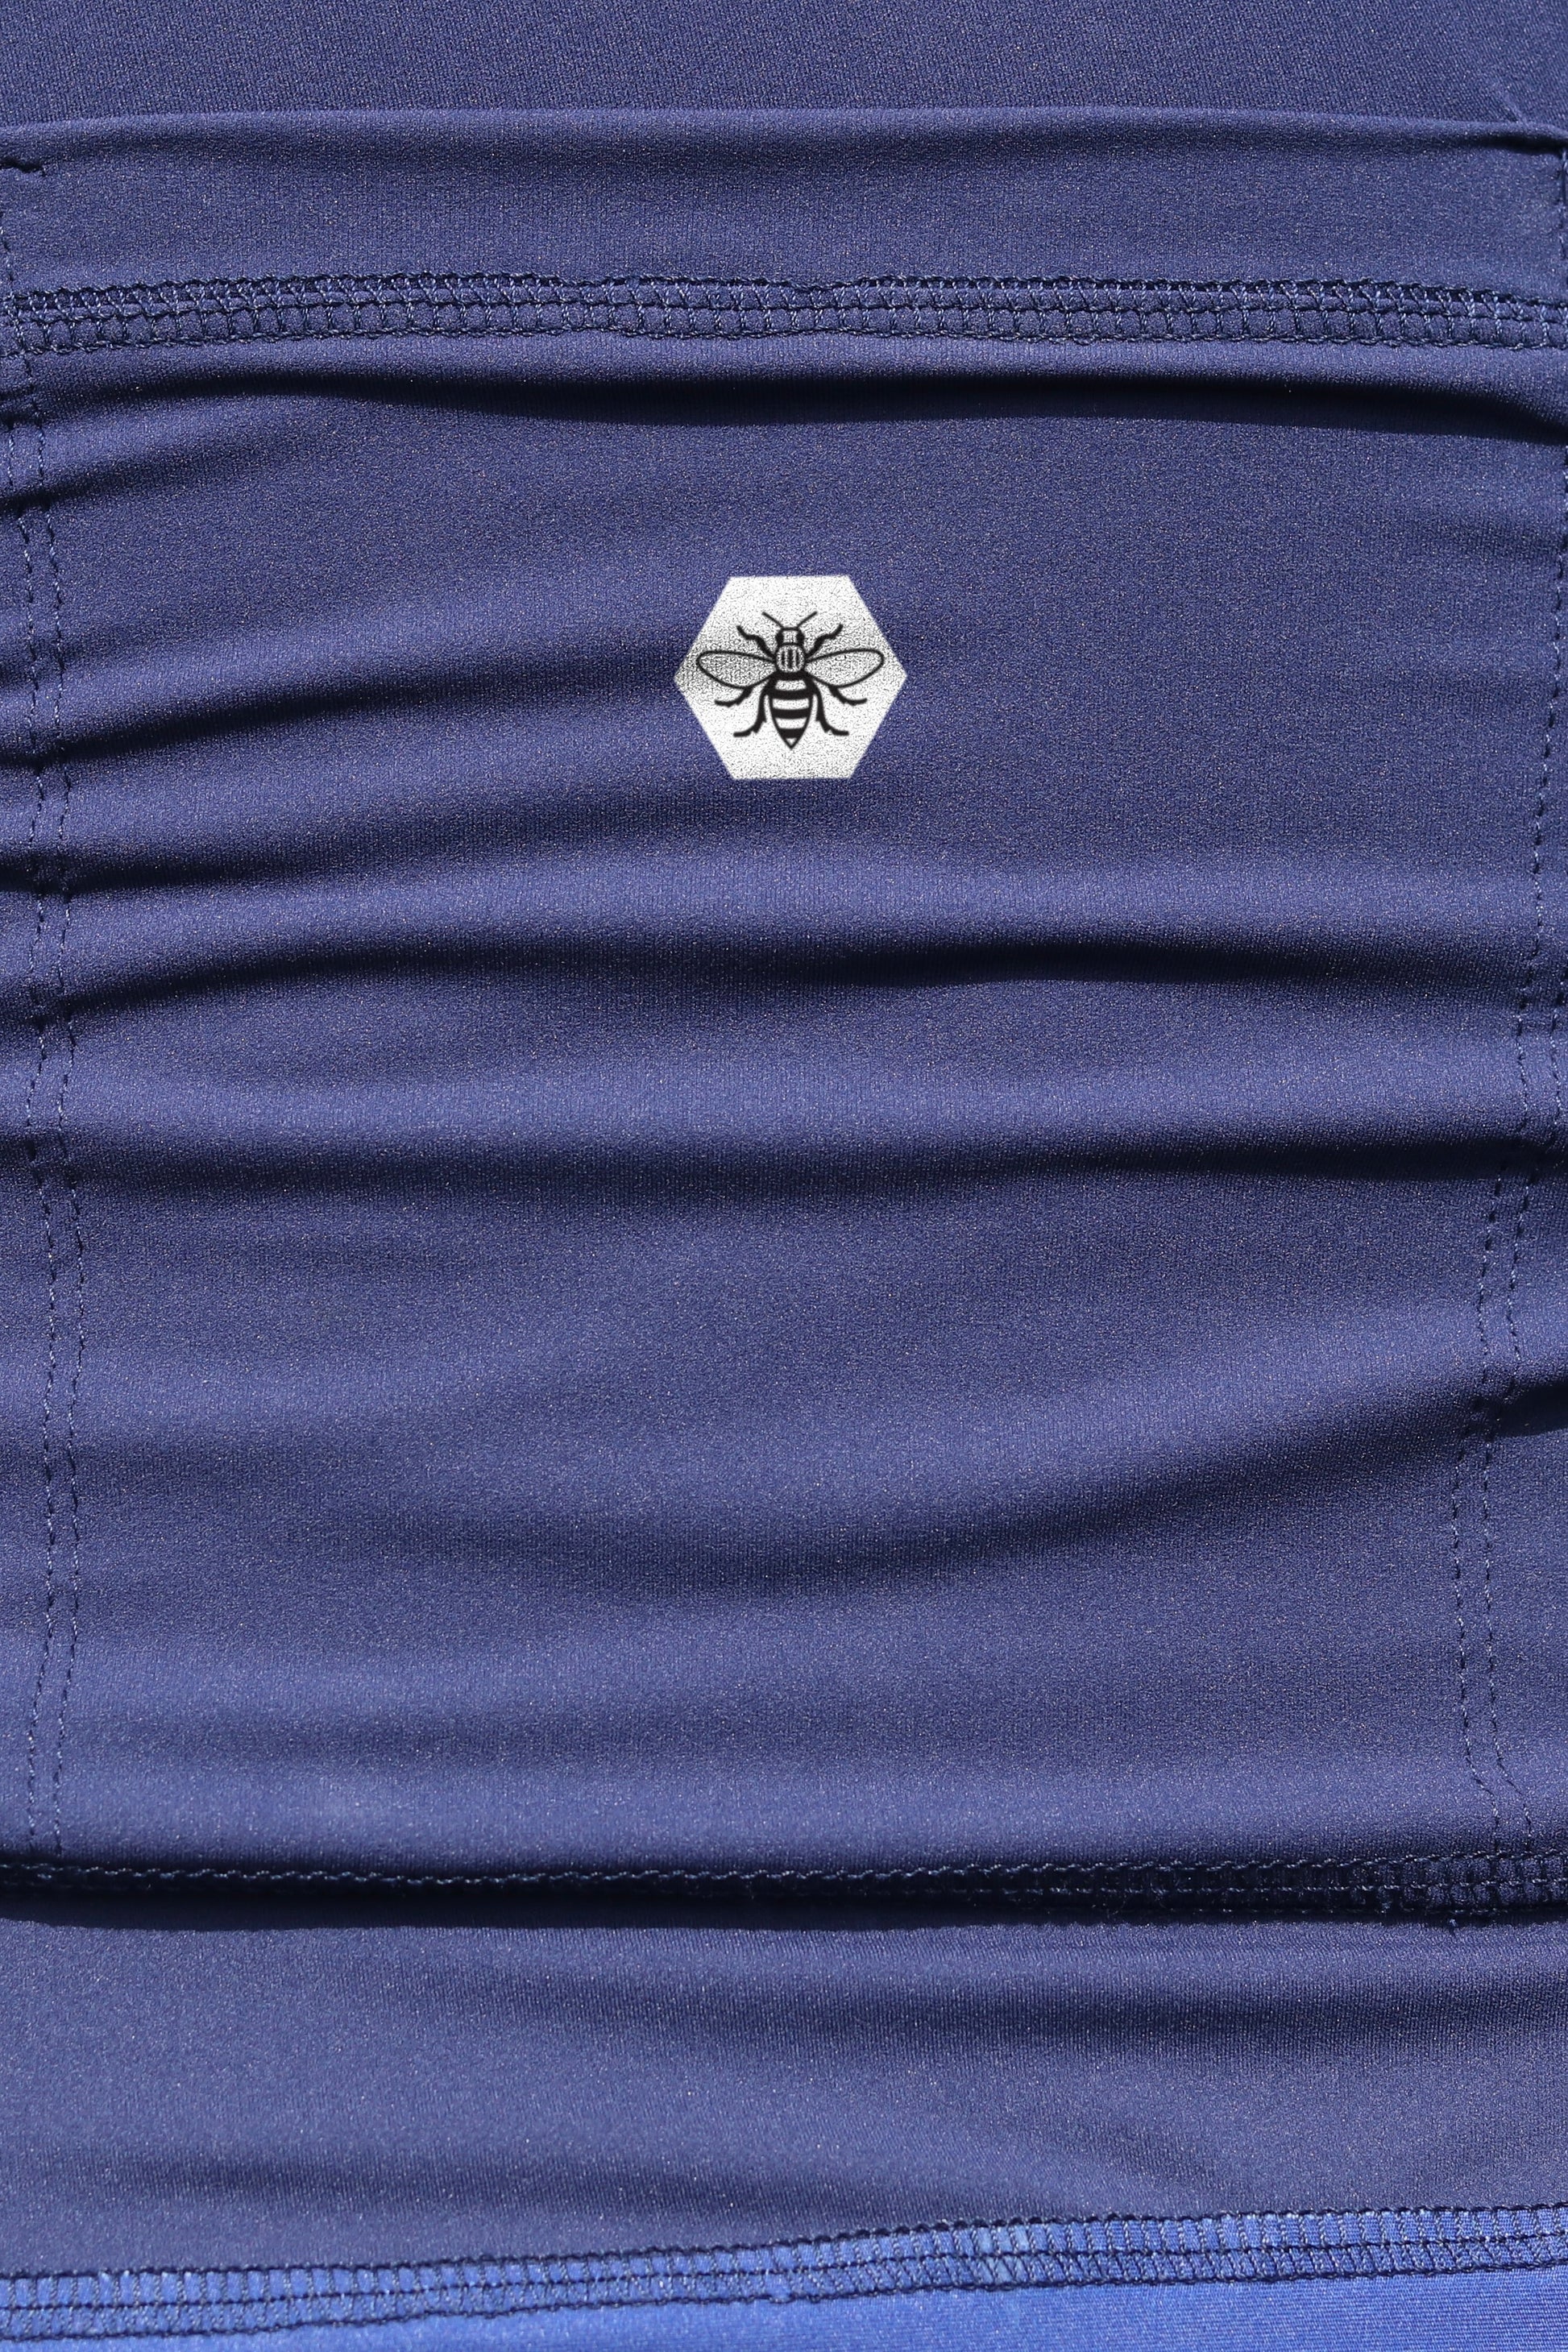 Paragon Jersey - Navy - Lusso Cycle Wear